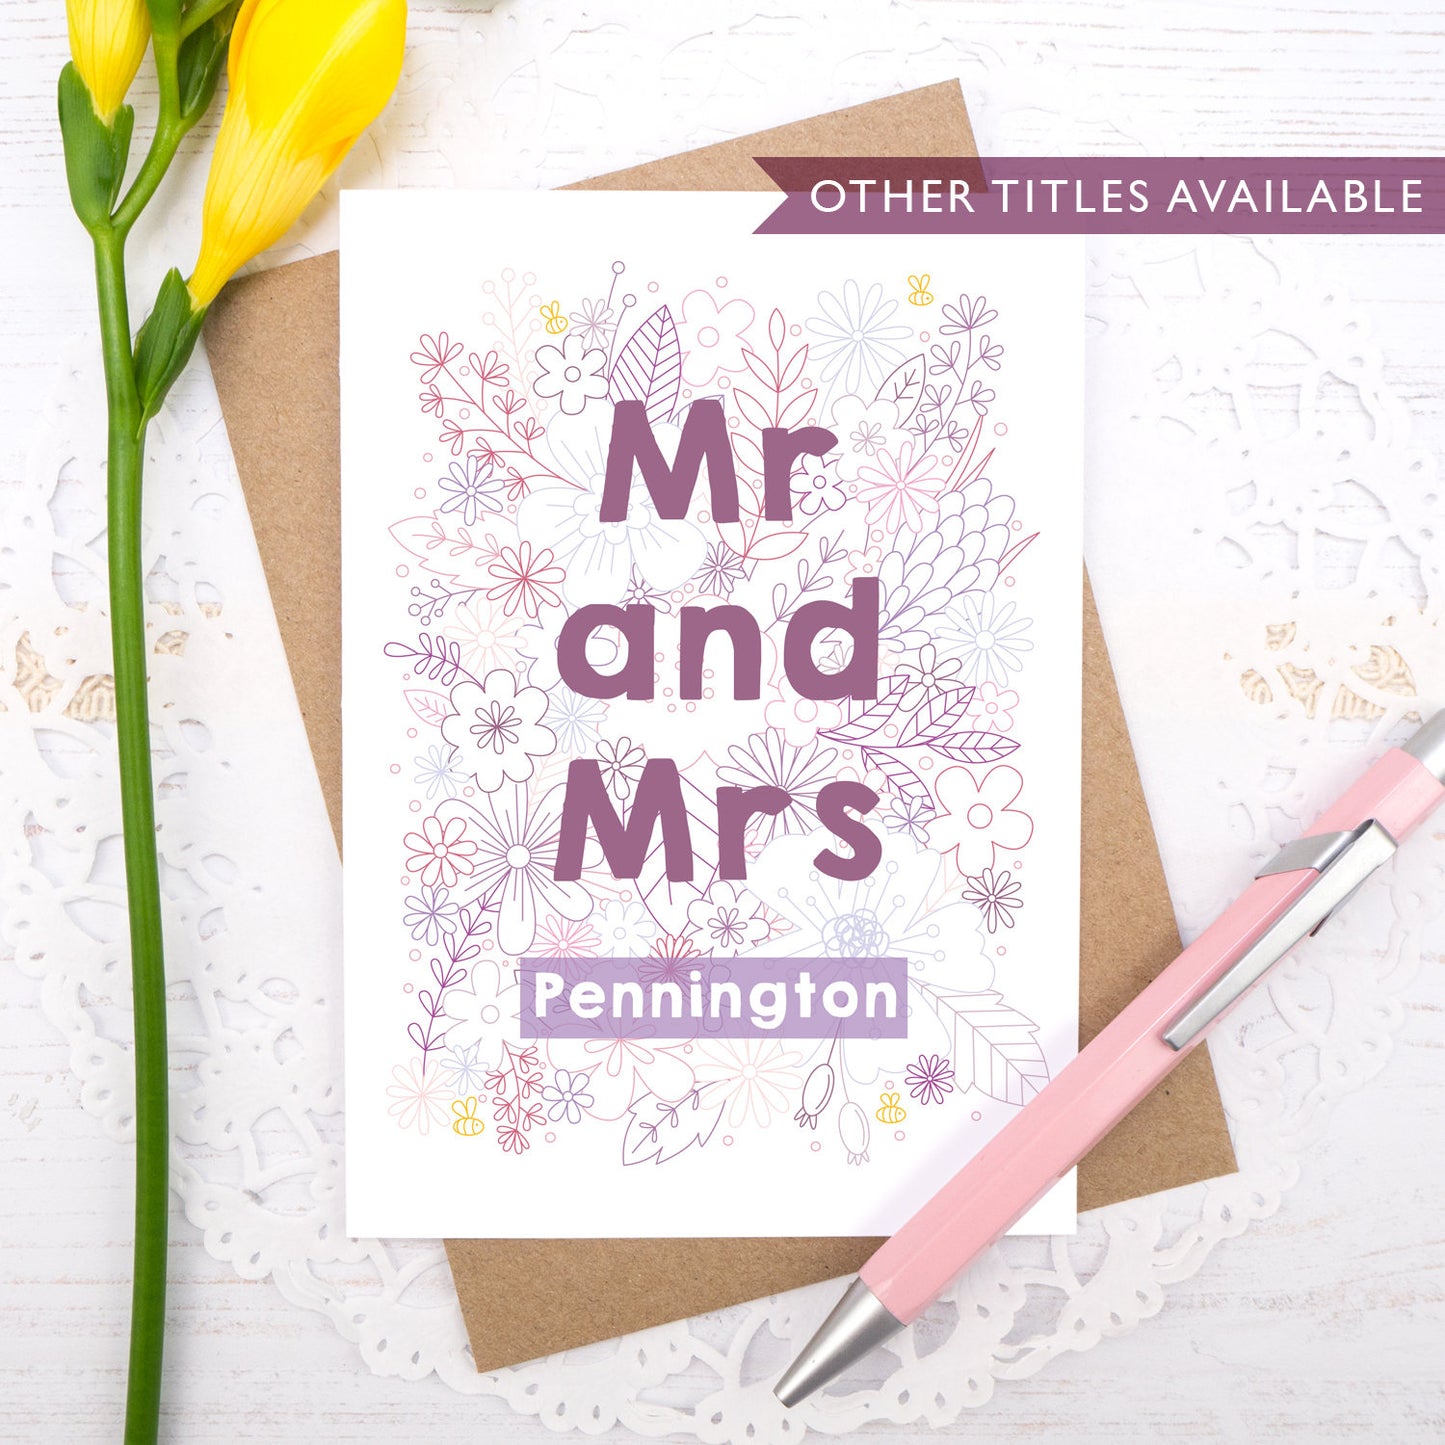 Personalised Mr and Mrs happy couple card, suitable for weddings, civil partnerships or engagements